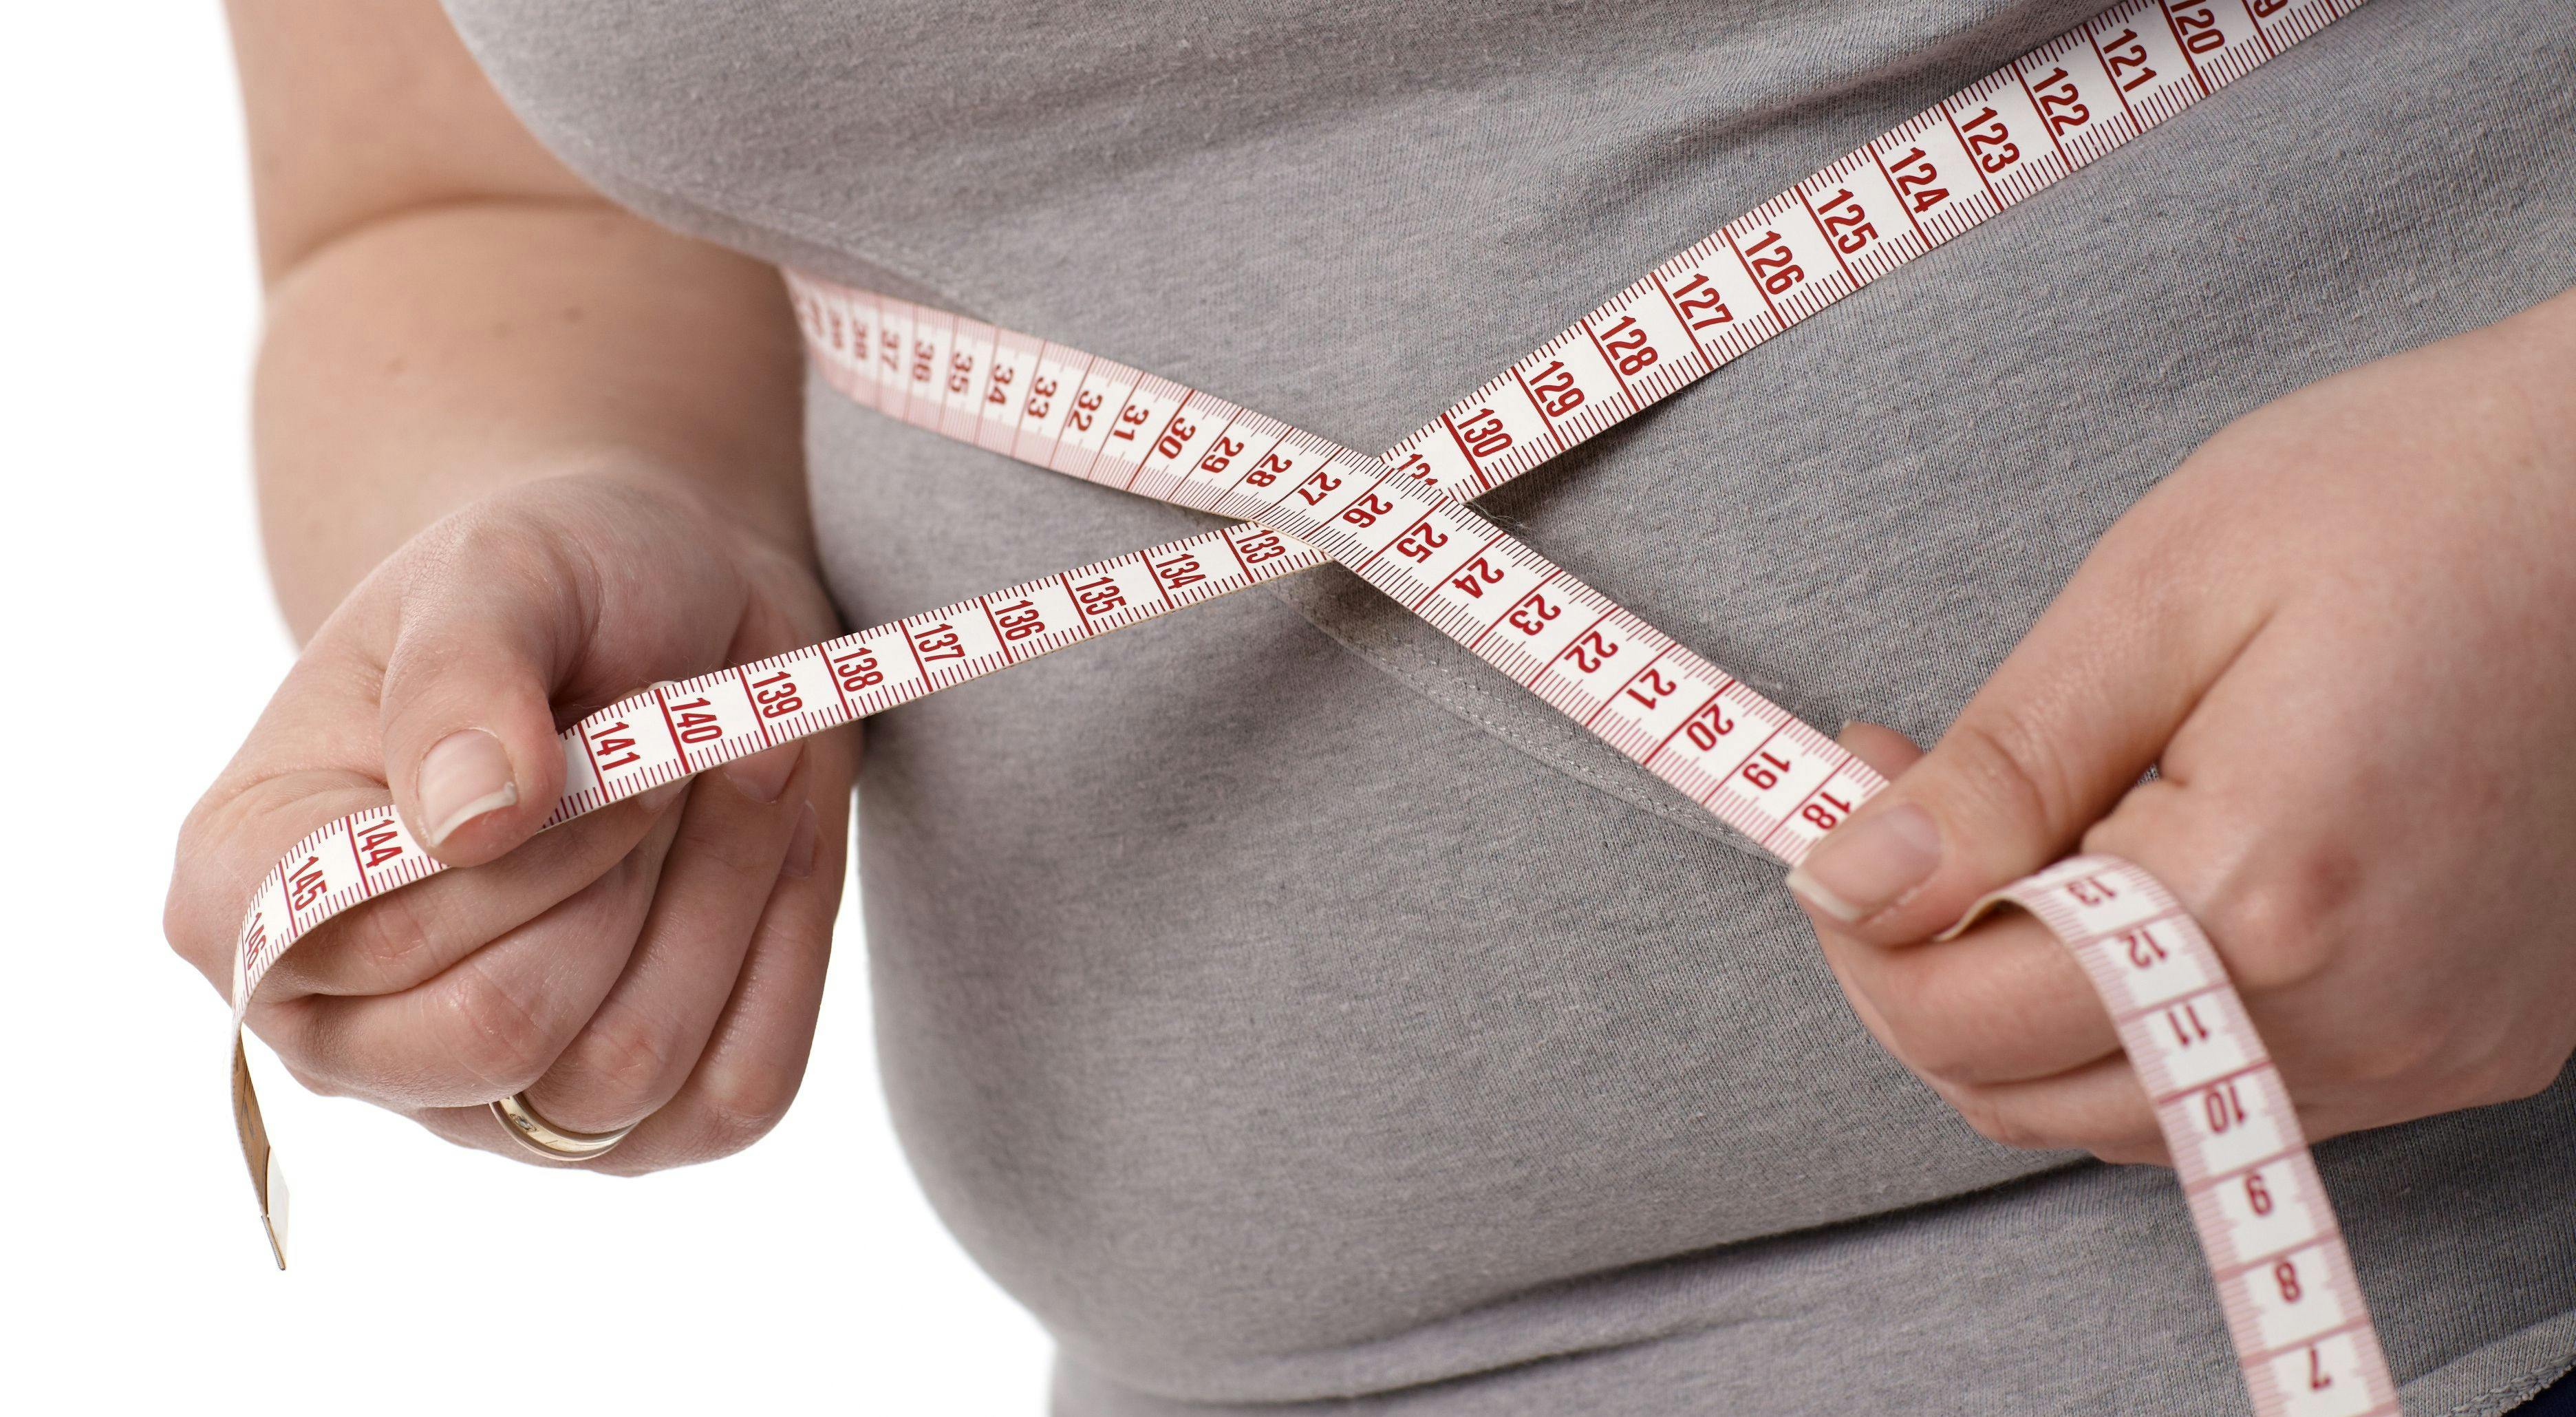 Body Mass Index Plays a Surprising Role in Immunotherapy's Effectiveness